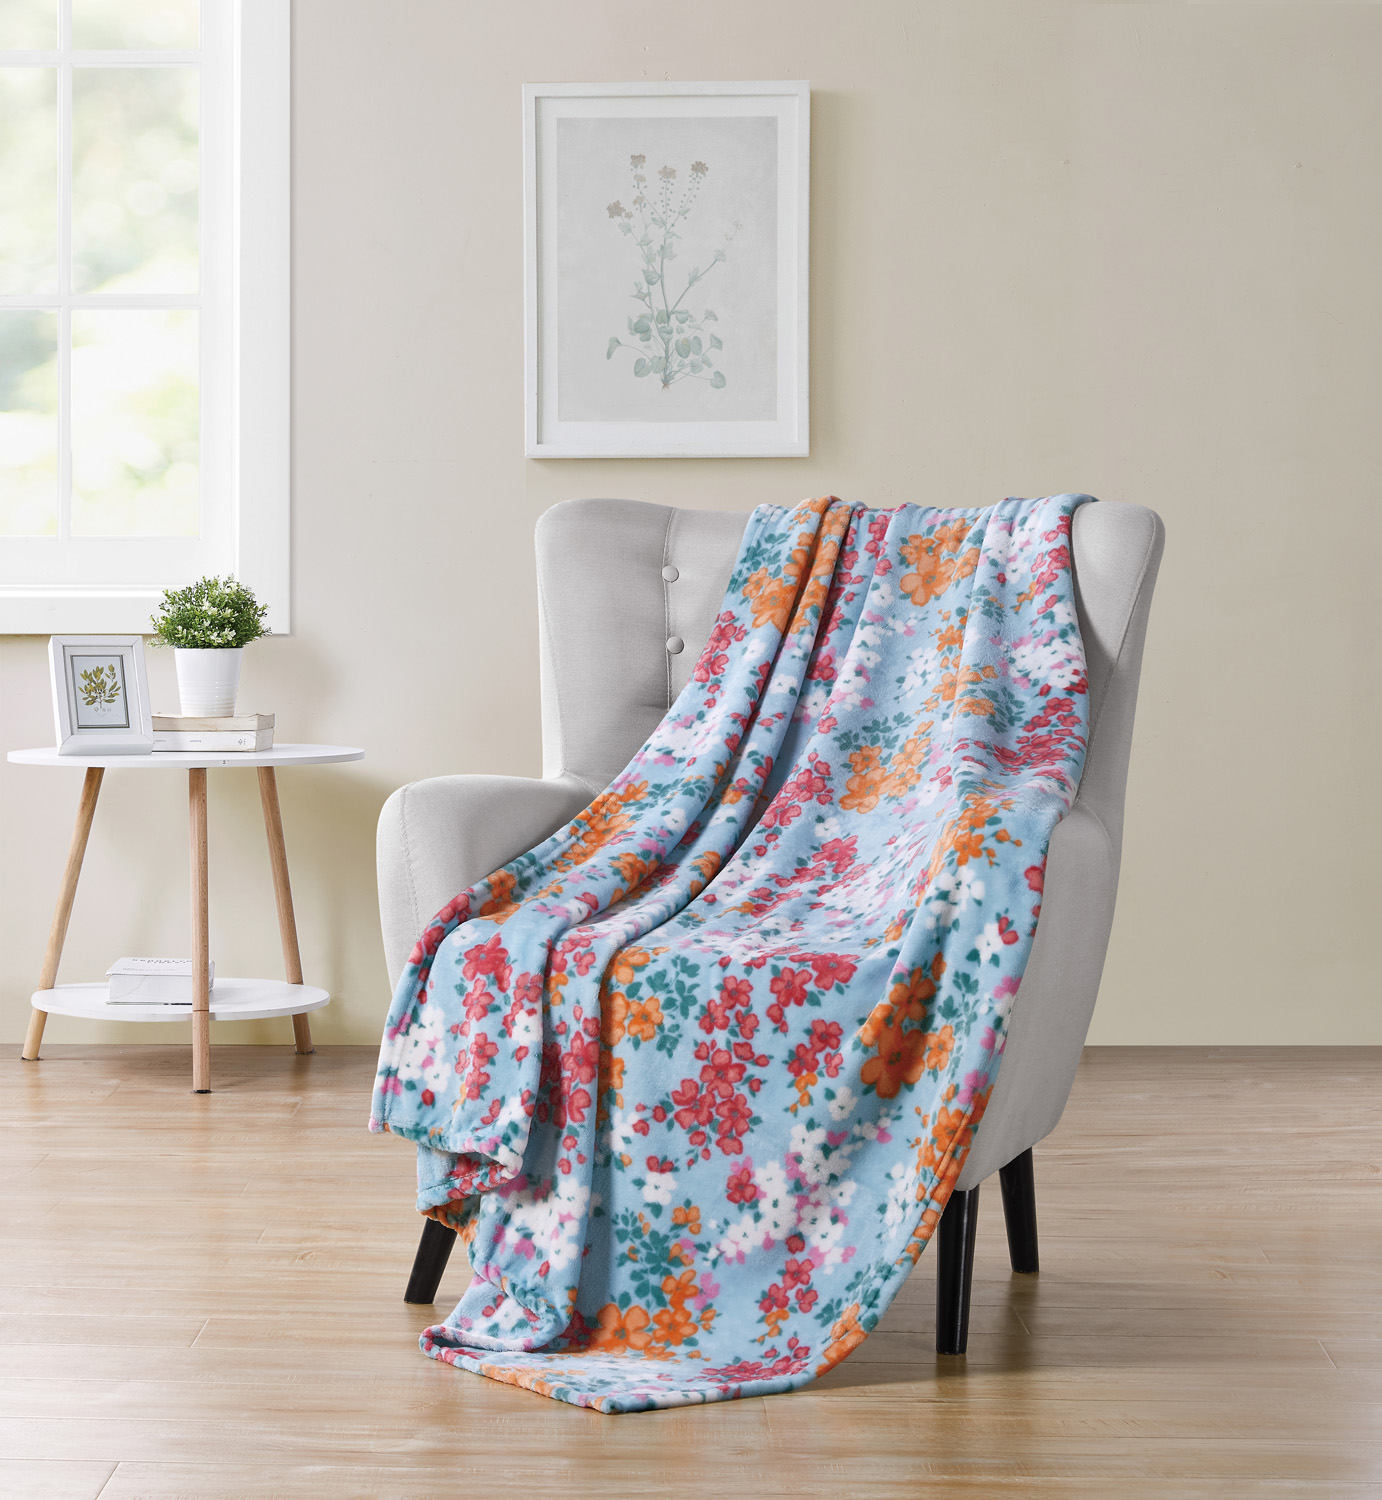 Hudson Essex Floral Expressions Plush Throw Blanket, Blue, 50x70 Inches ...